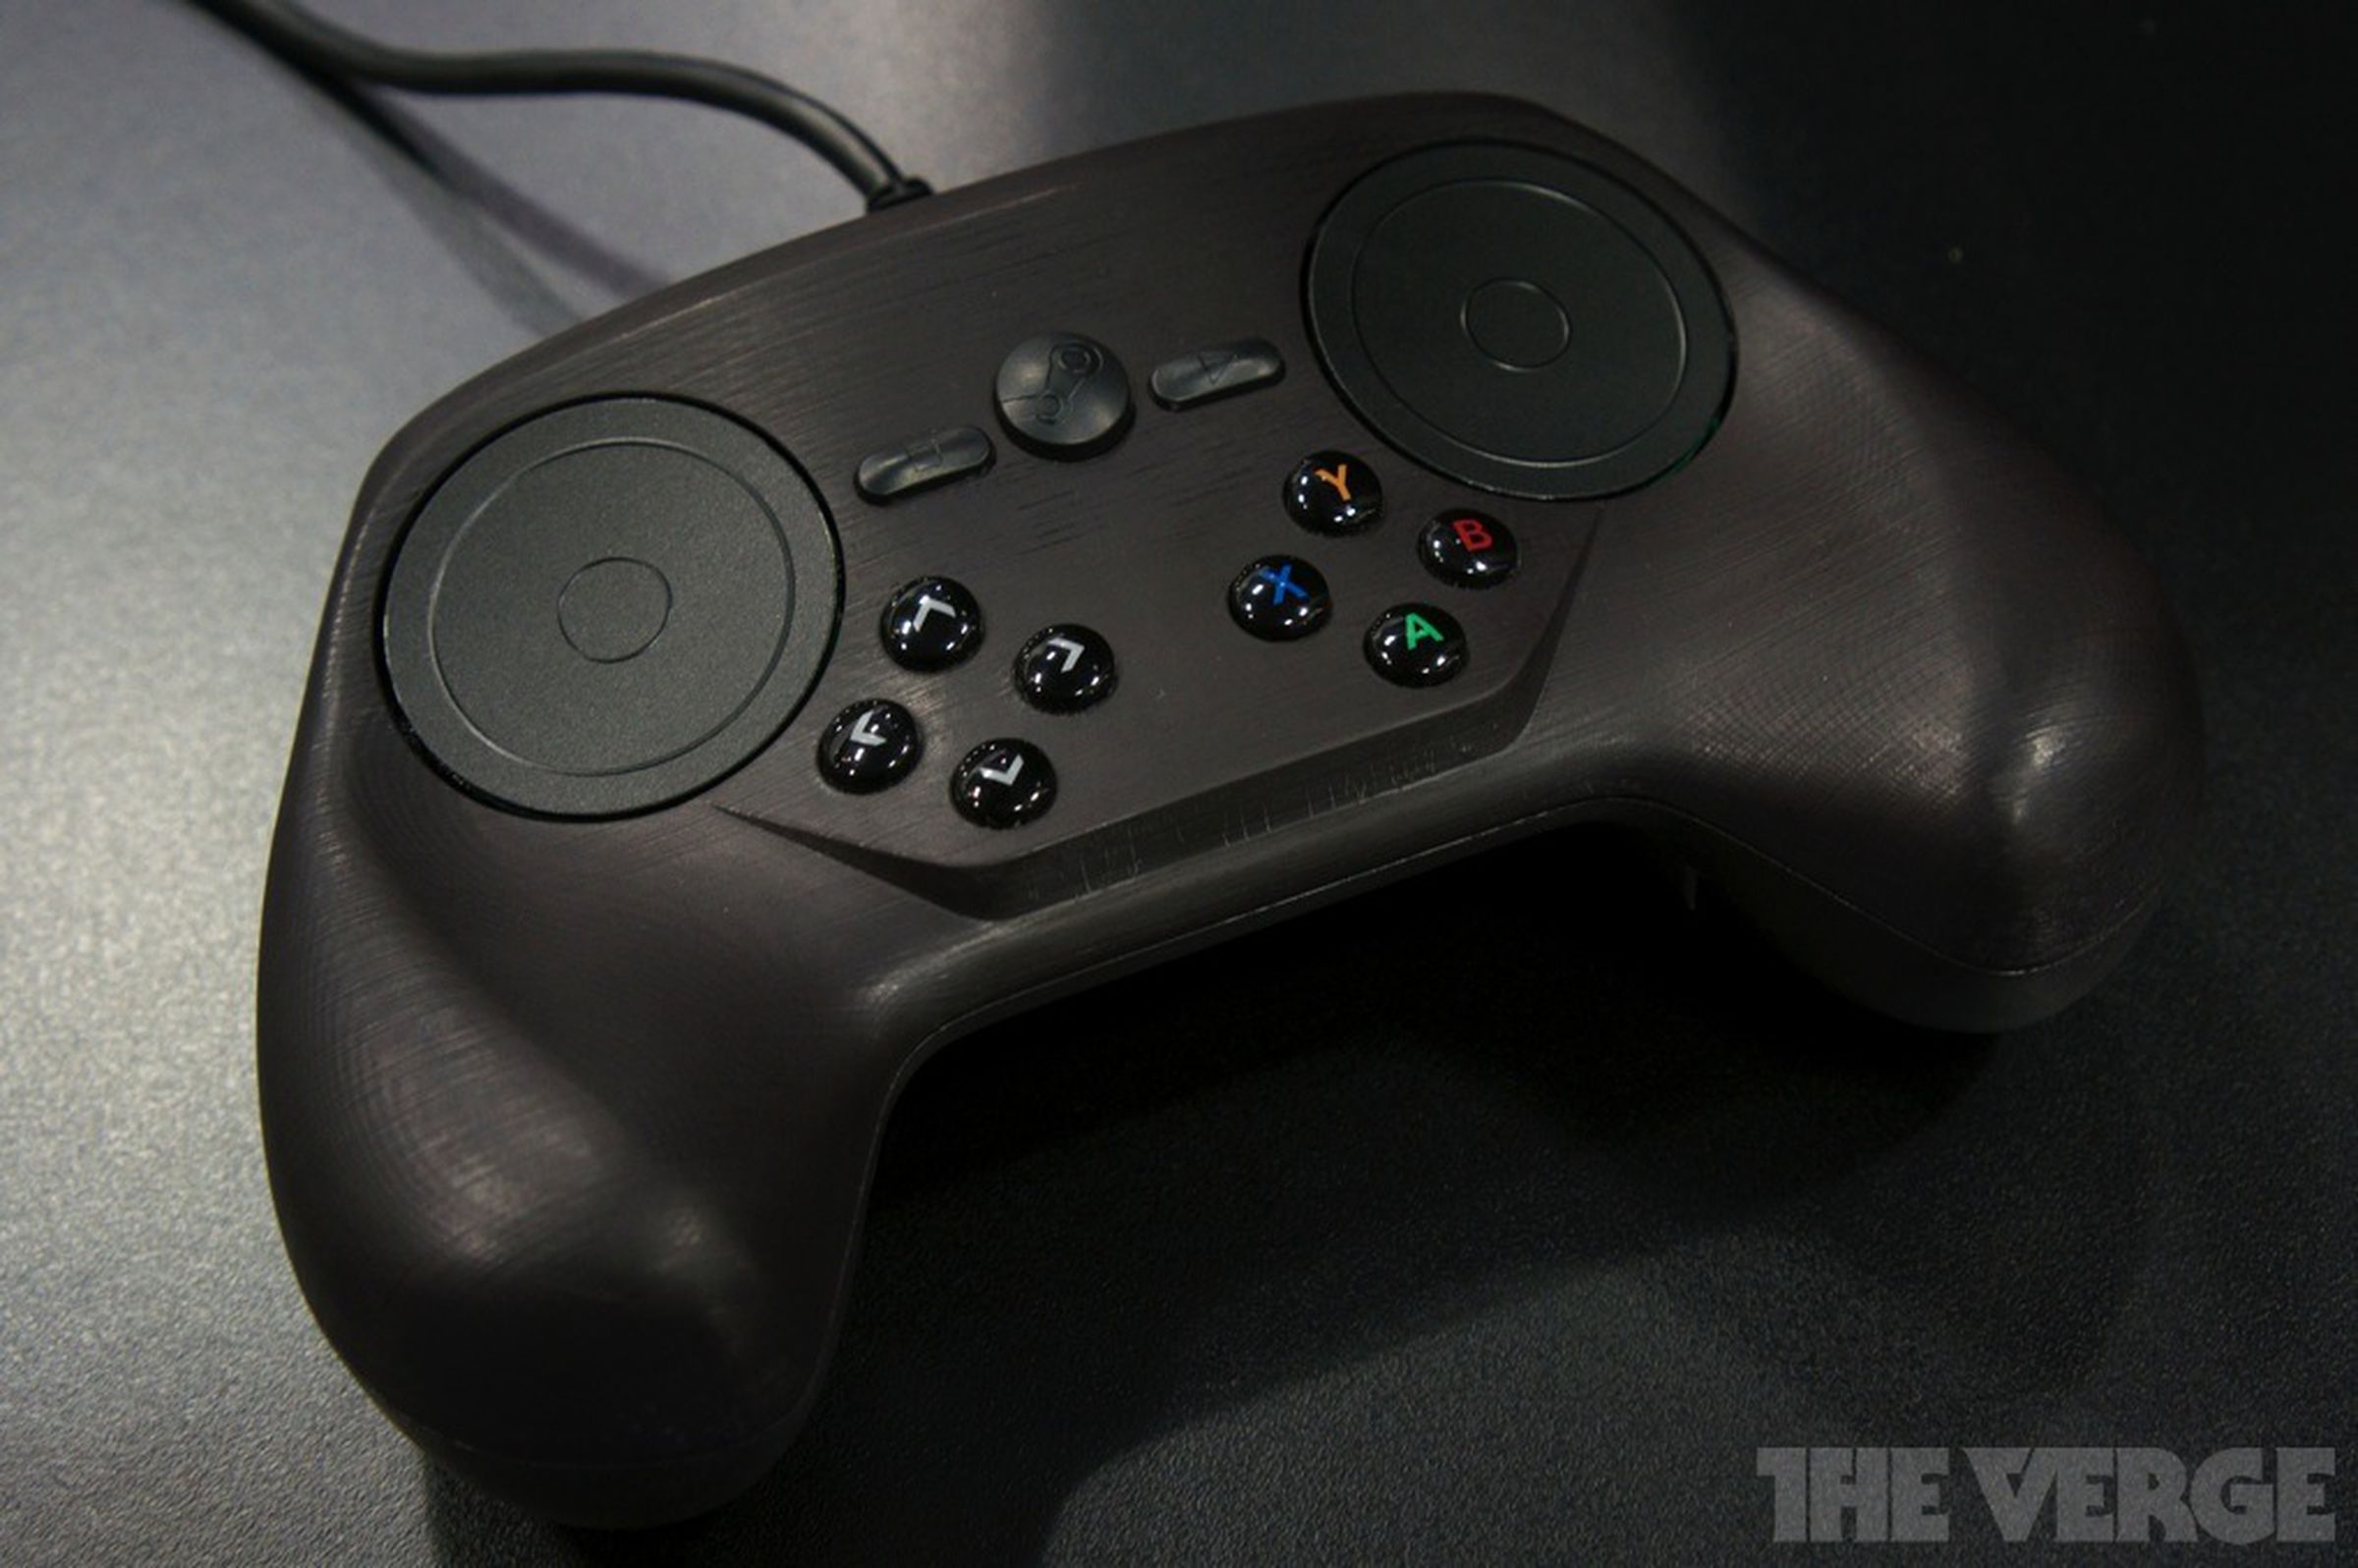 Steam Controller prototype hands-on photos